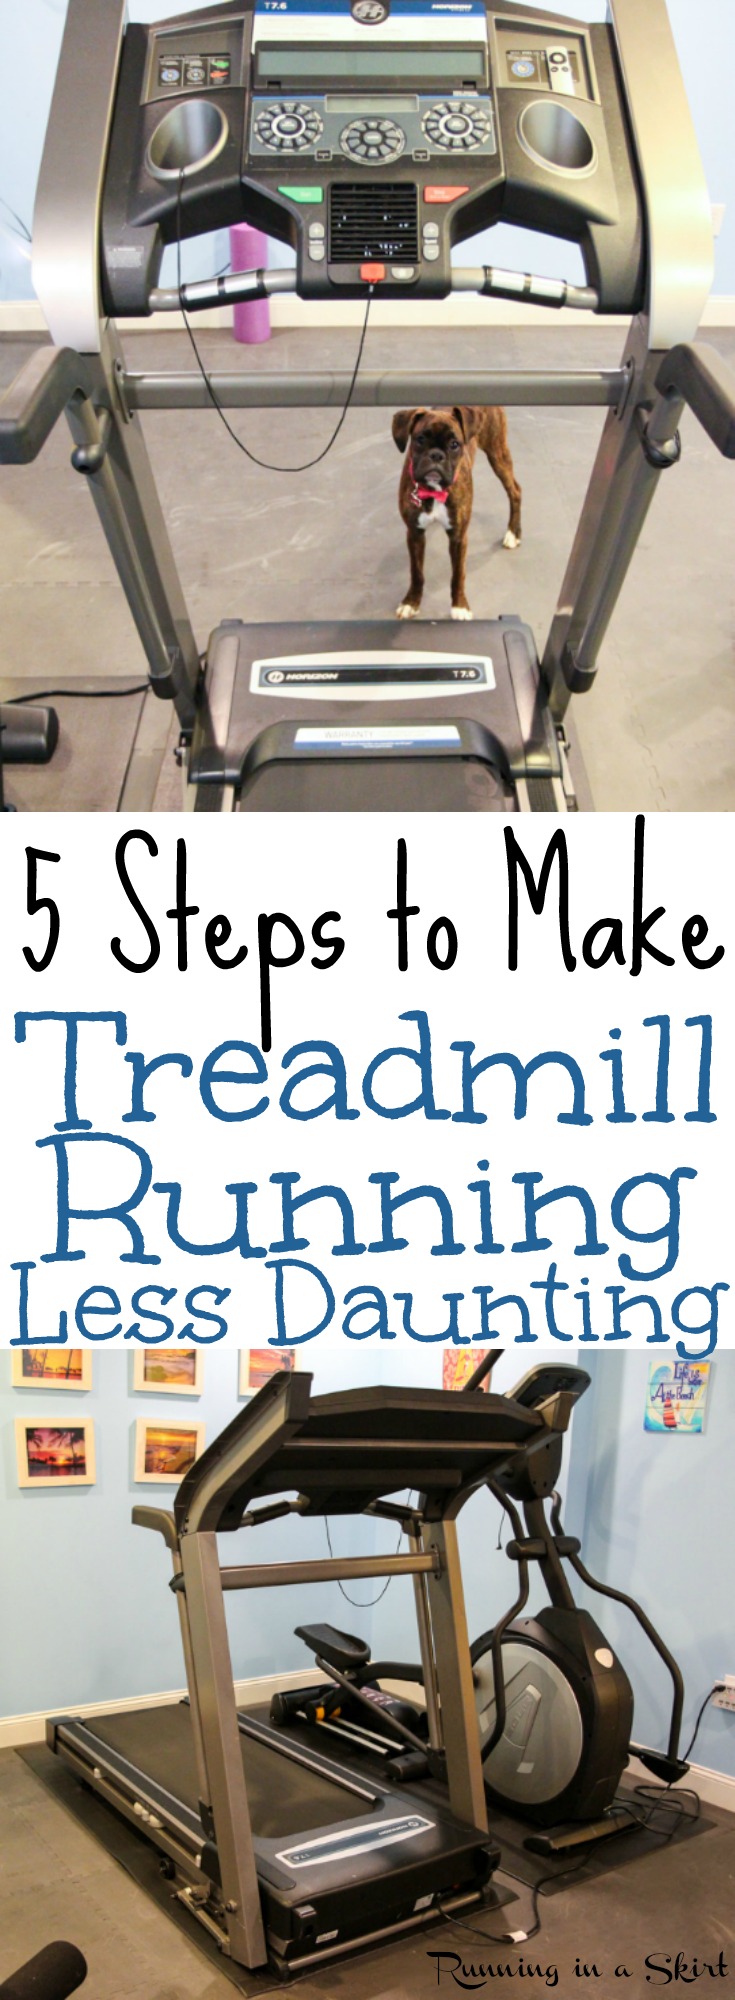 5 Tips to Make Treadmill Running Less Daunting.  And easy and awesome plan to make the time go by faster including workout ideas. Motivation for beginners or advanced. / Running in a Skirt via @juliewunder